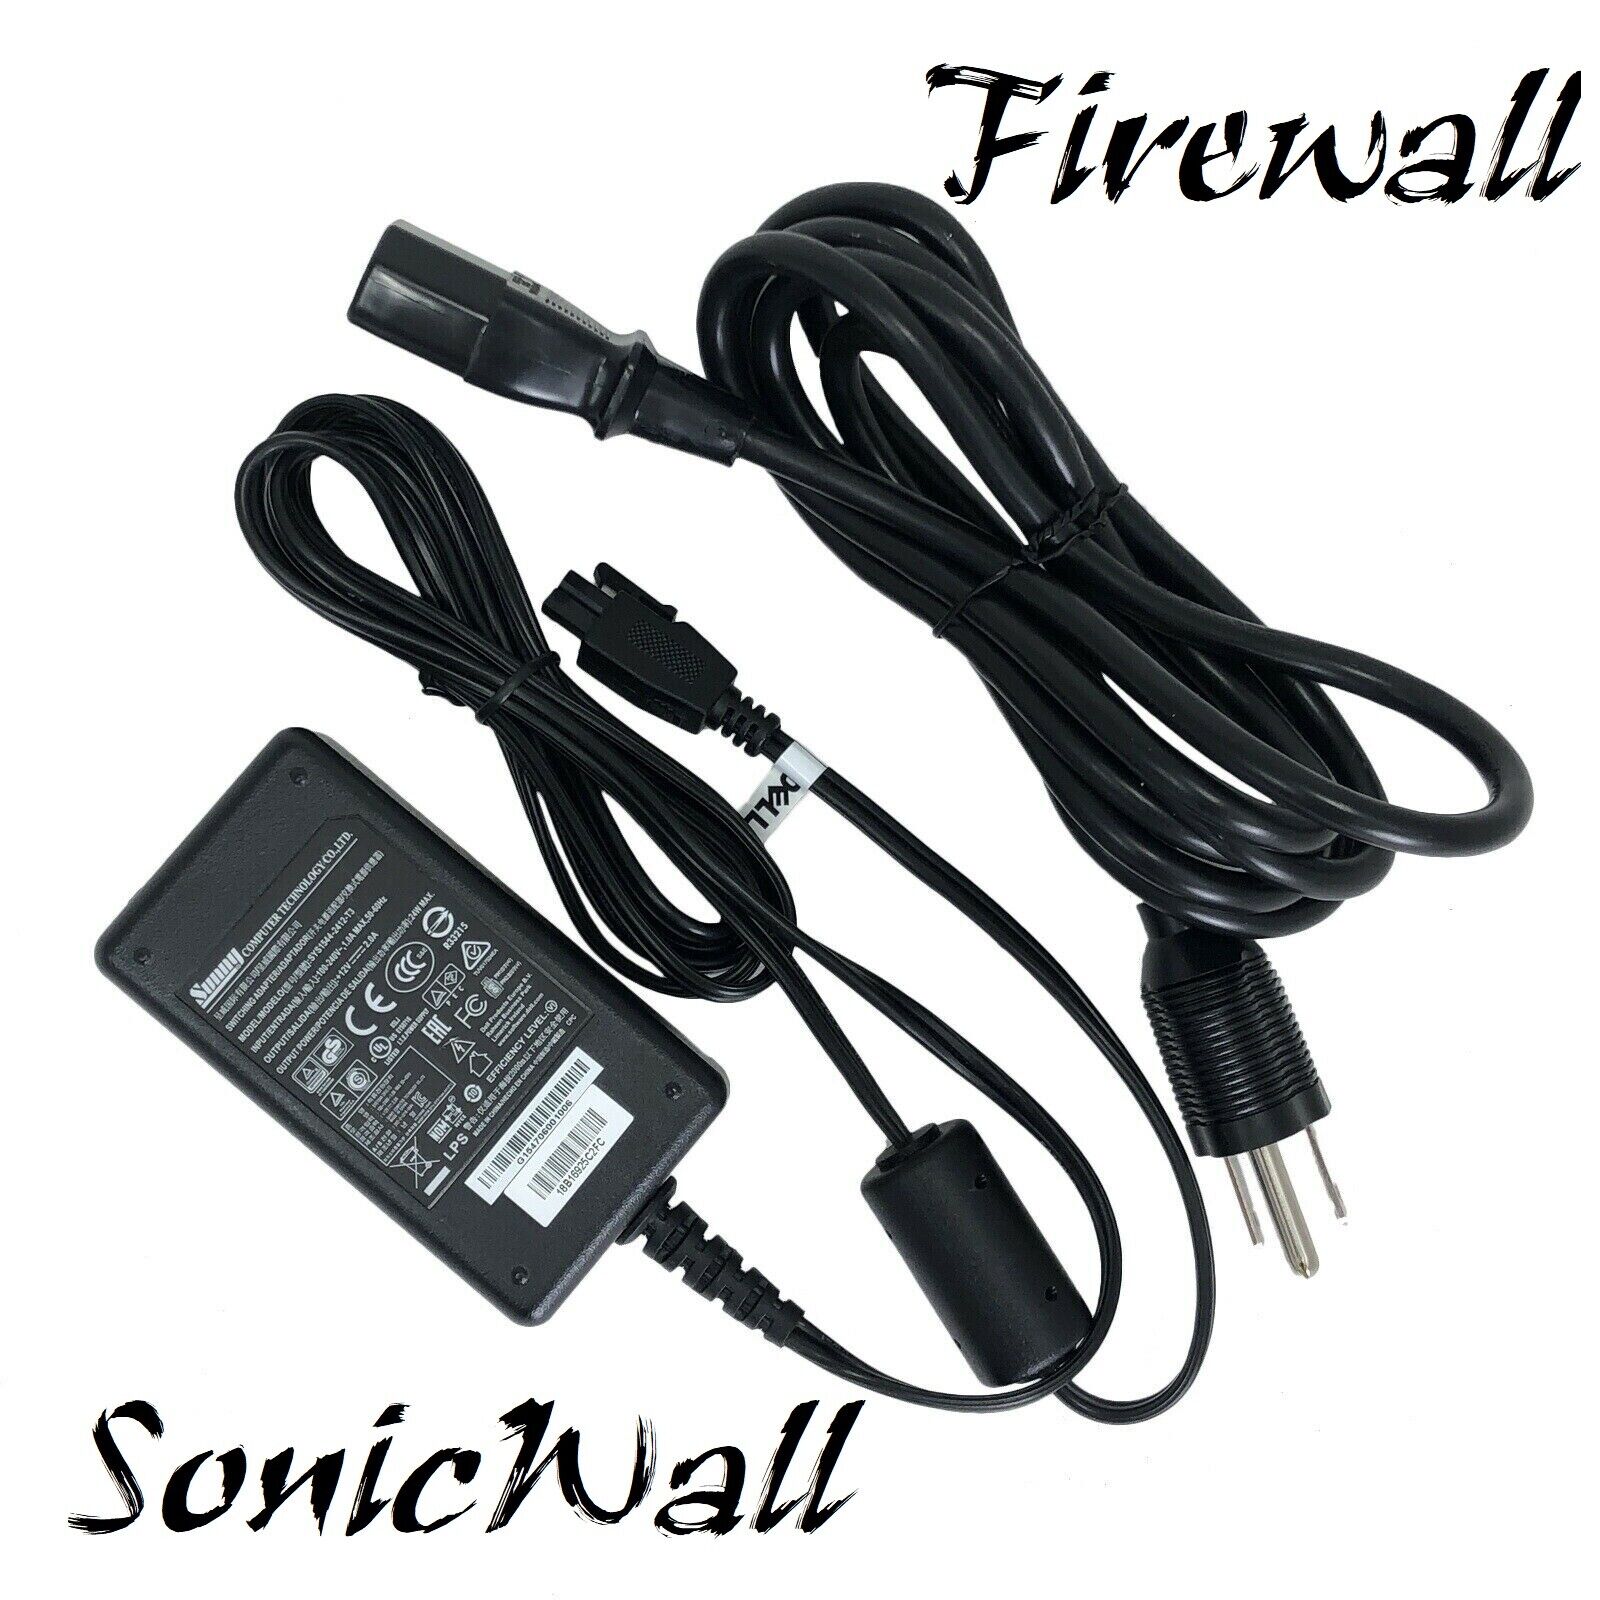 Genuine SonicWALL TZ300 Firewall Router 24W AC Adapter Power Supply W/P.Cord